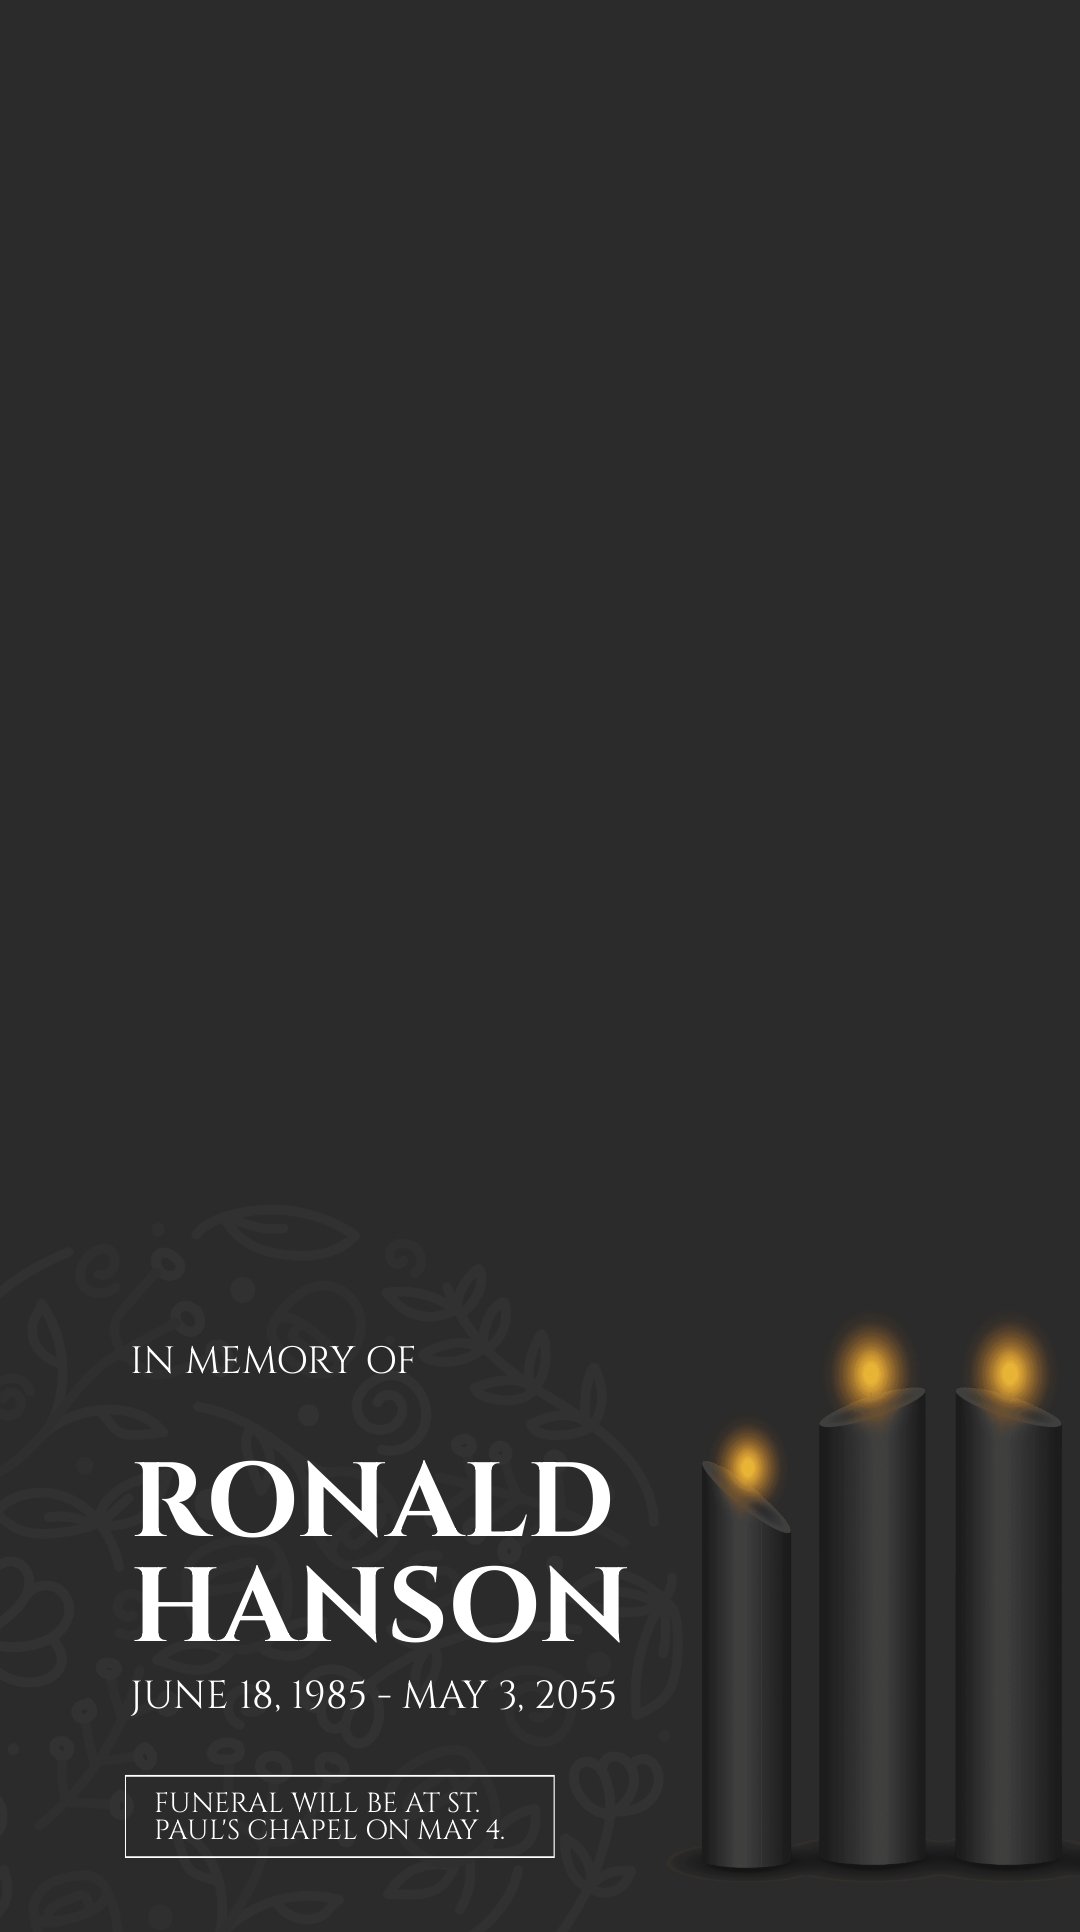 Simple Funeral Snapchat Geofilter Template